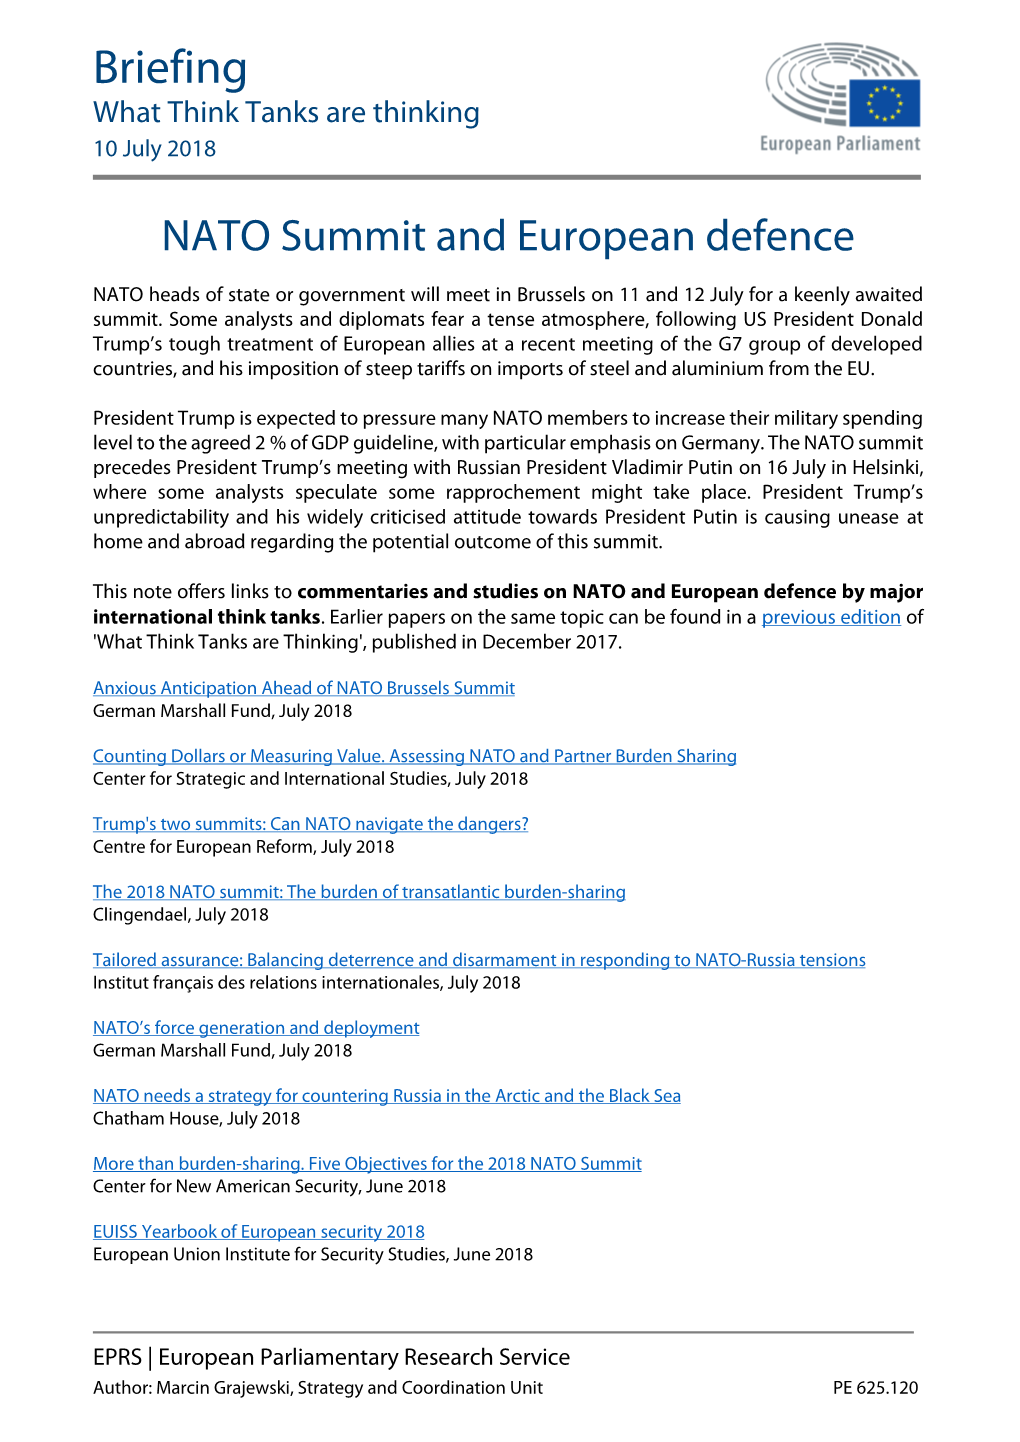 NATO Summit and European Defence